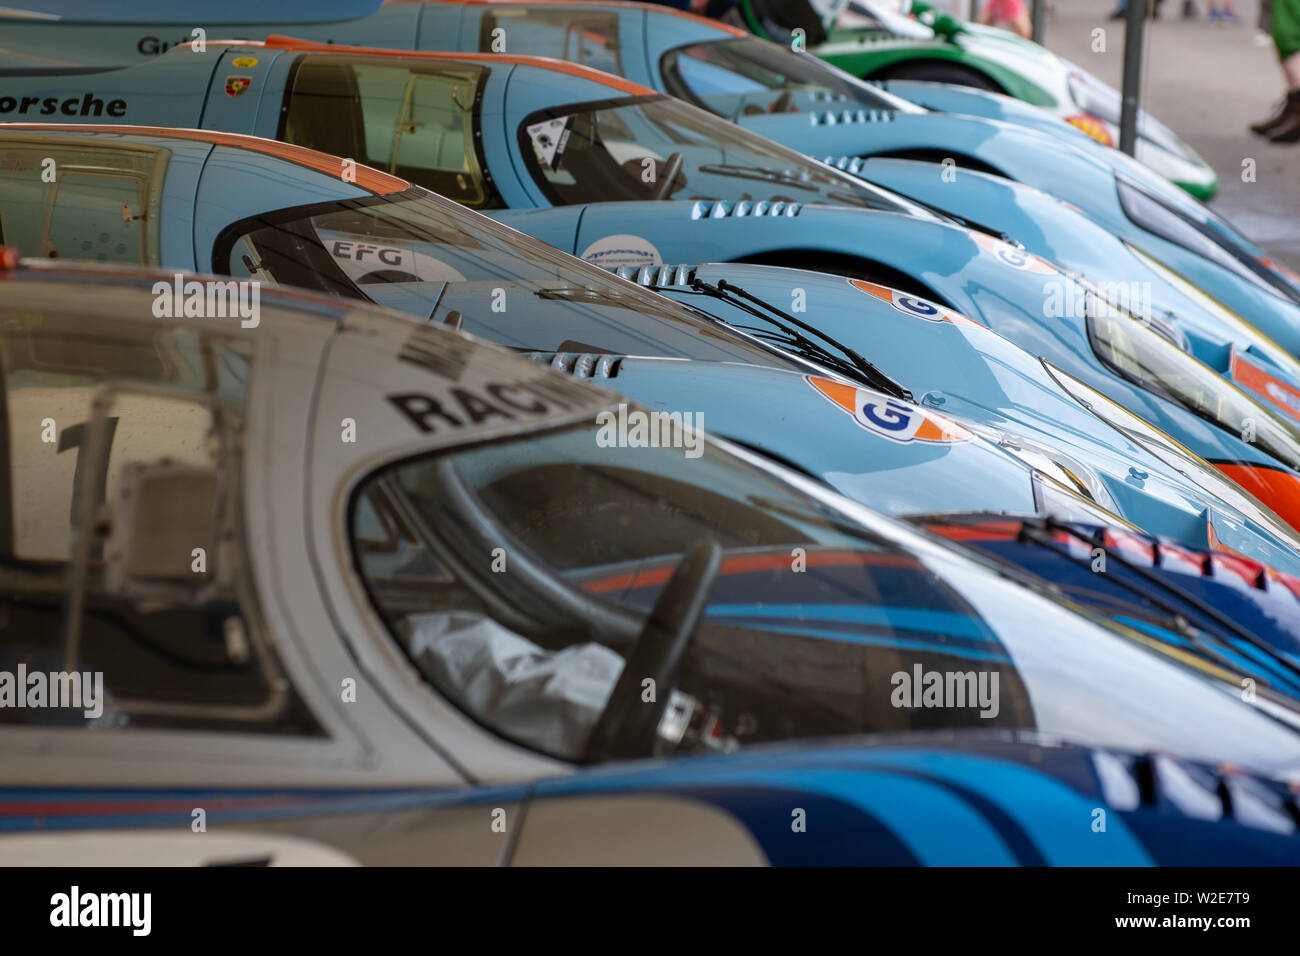 24 Hours of Le Mans Porsche 917 racing car line up in Gulf and Martini livery at Goodwood Festival of Speed 2019, Chichester, West Sussex, England UK Stock Photo